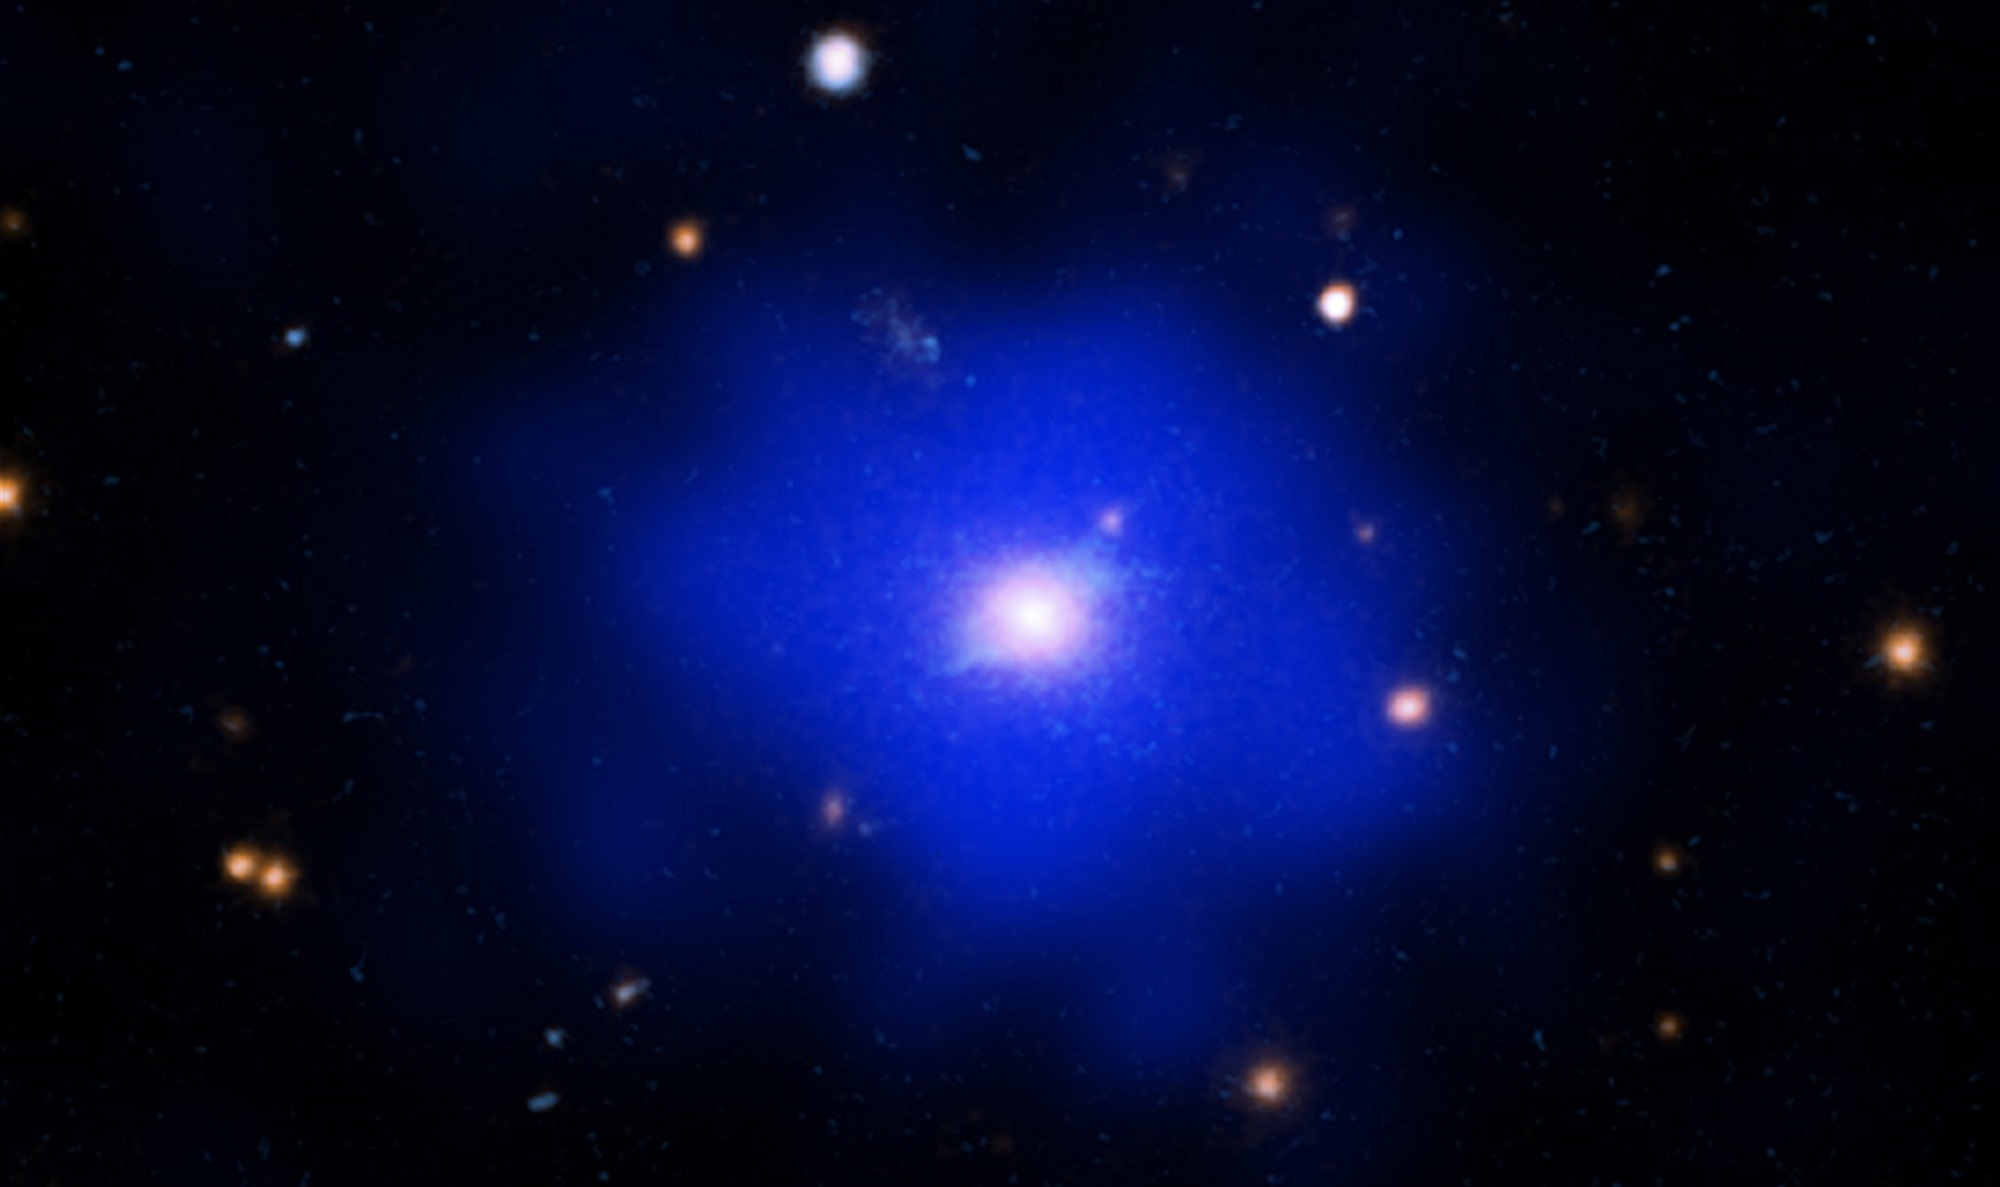 Secrets of the early universe are hidden in this chill galaxy cluster